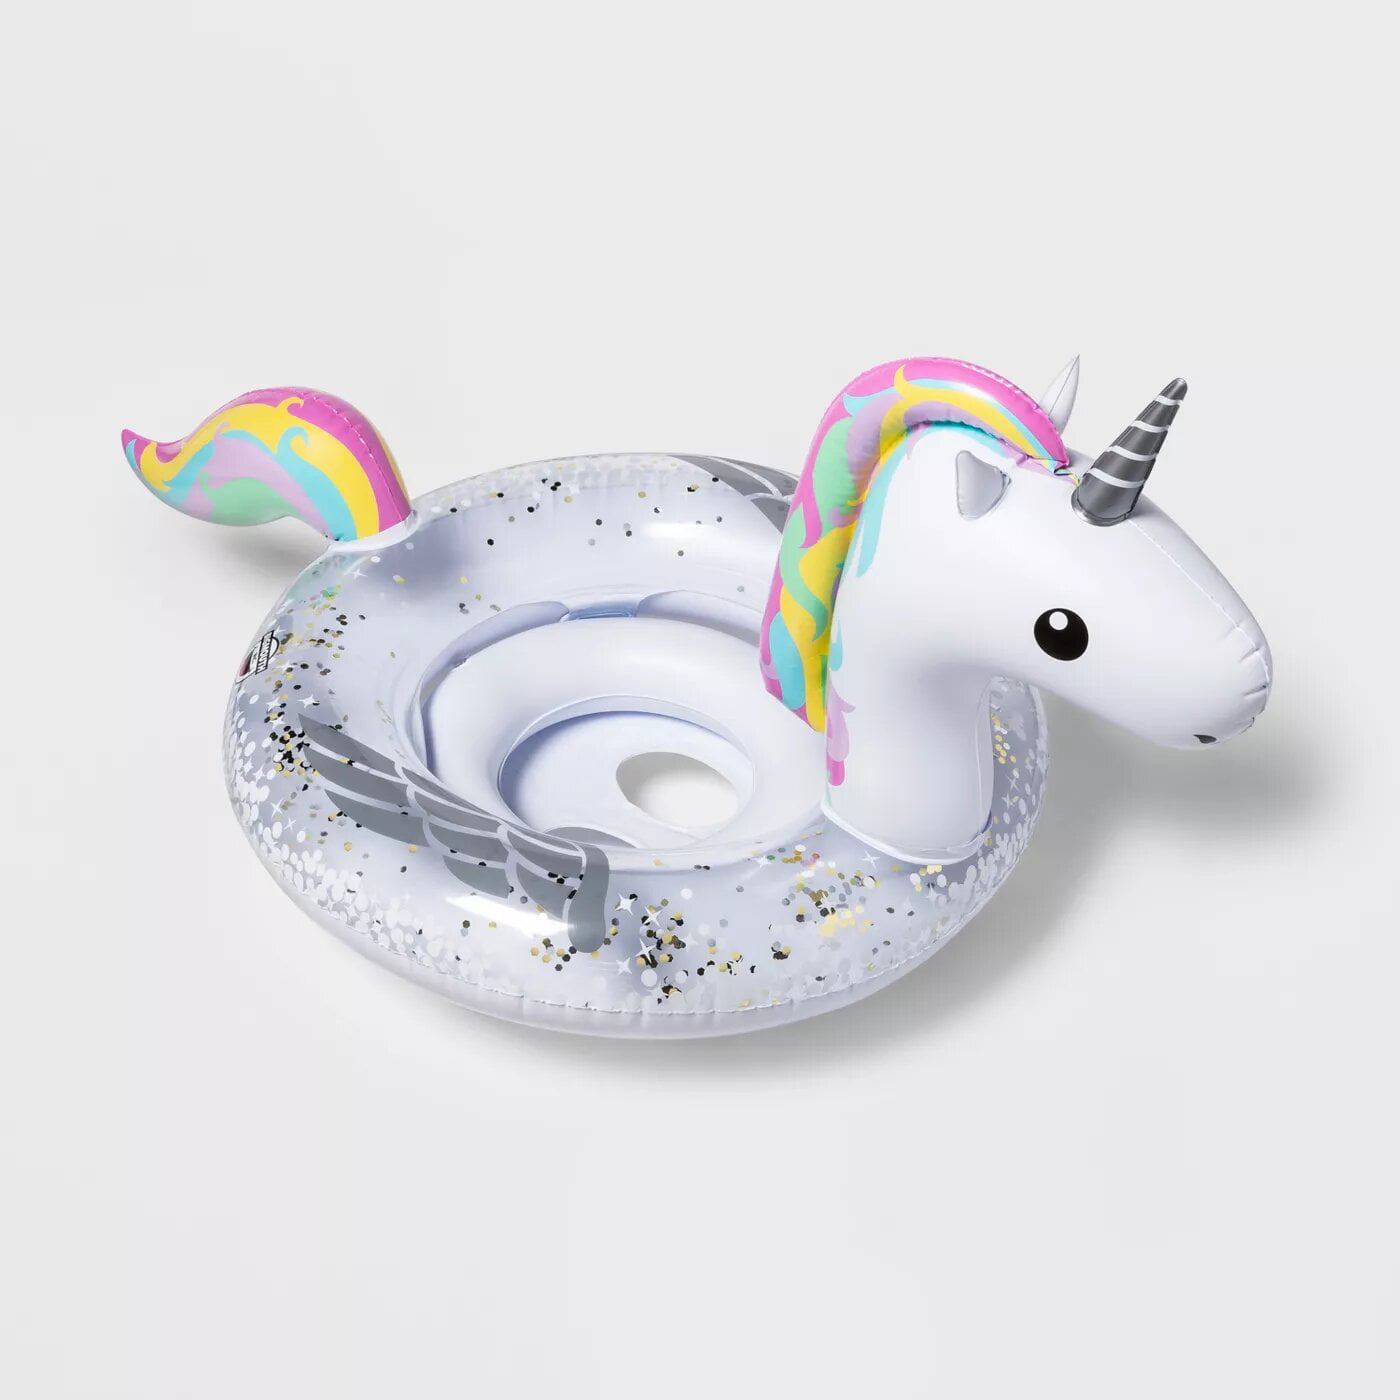 Details about   Sun Squad Kid’s Lil’ Unicorn Inflatable Pool Water Float 12-36 months To 40 lbs 